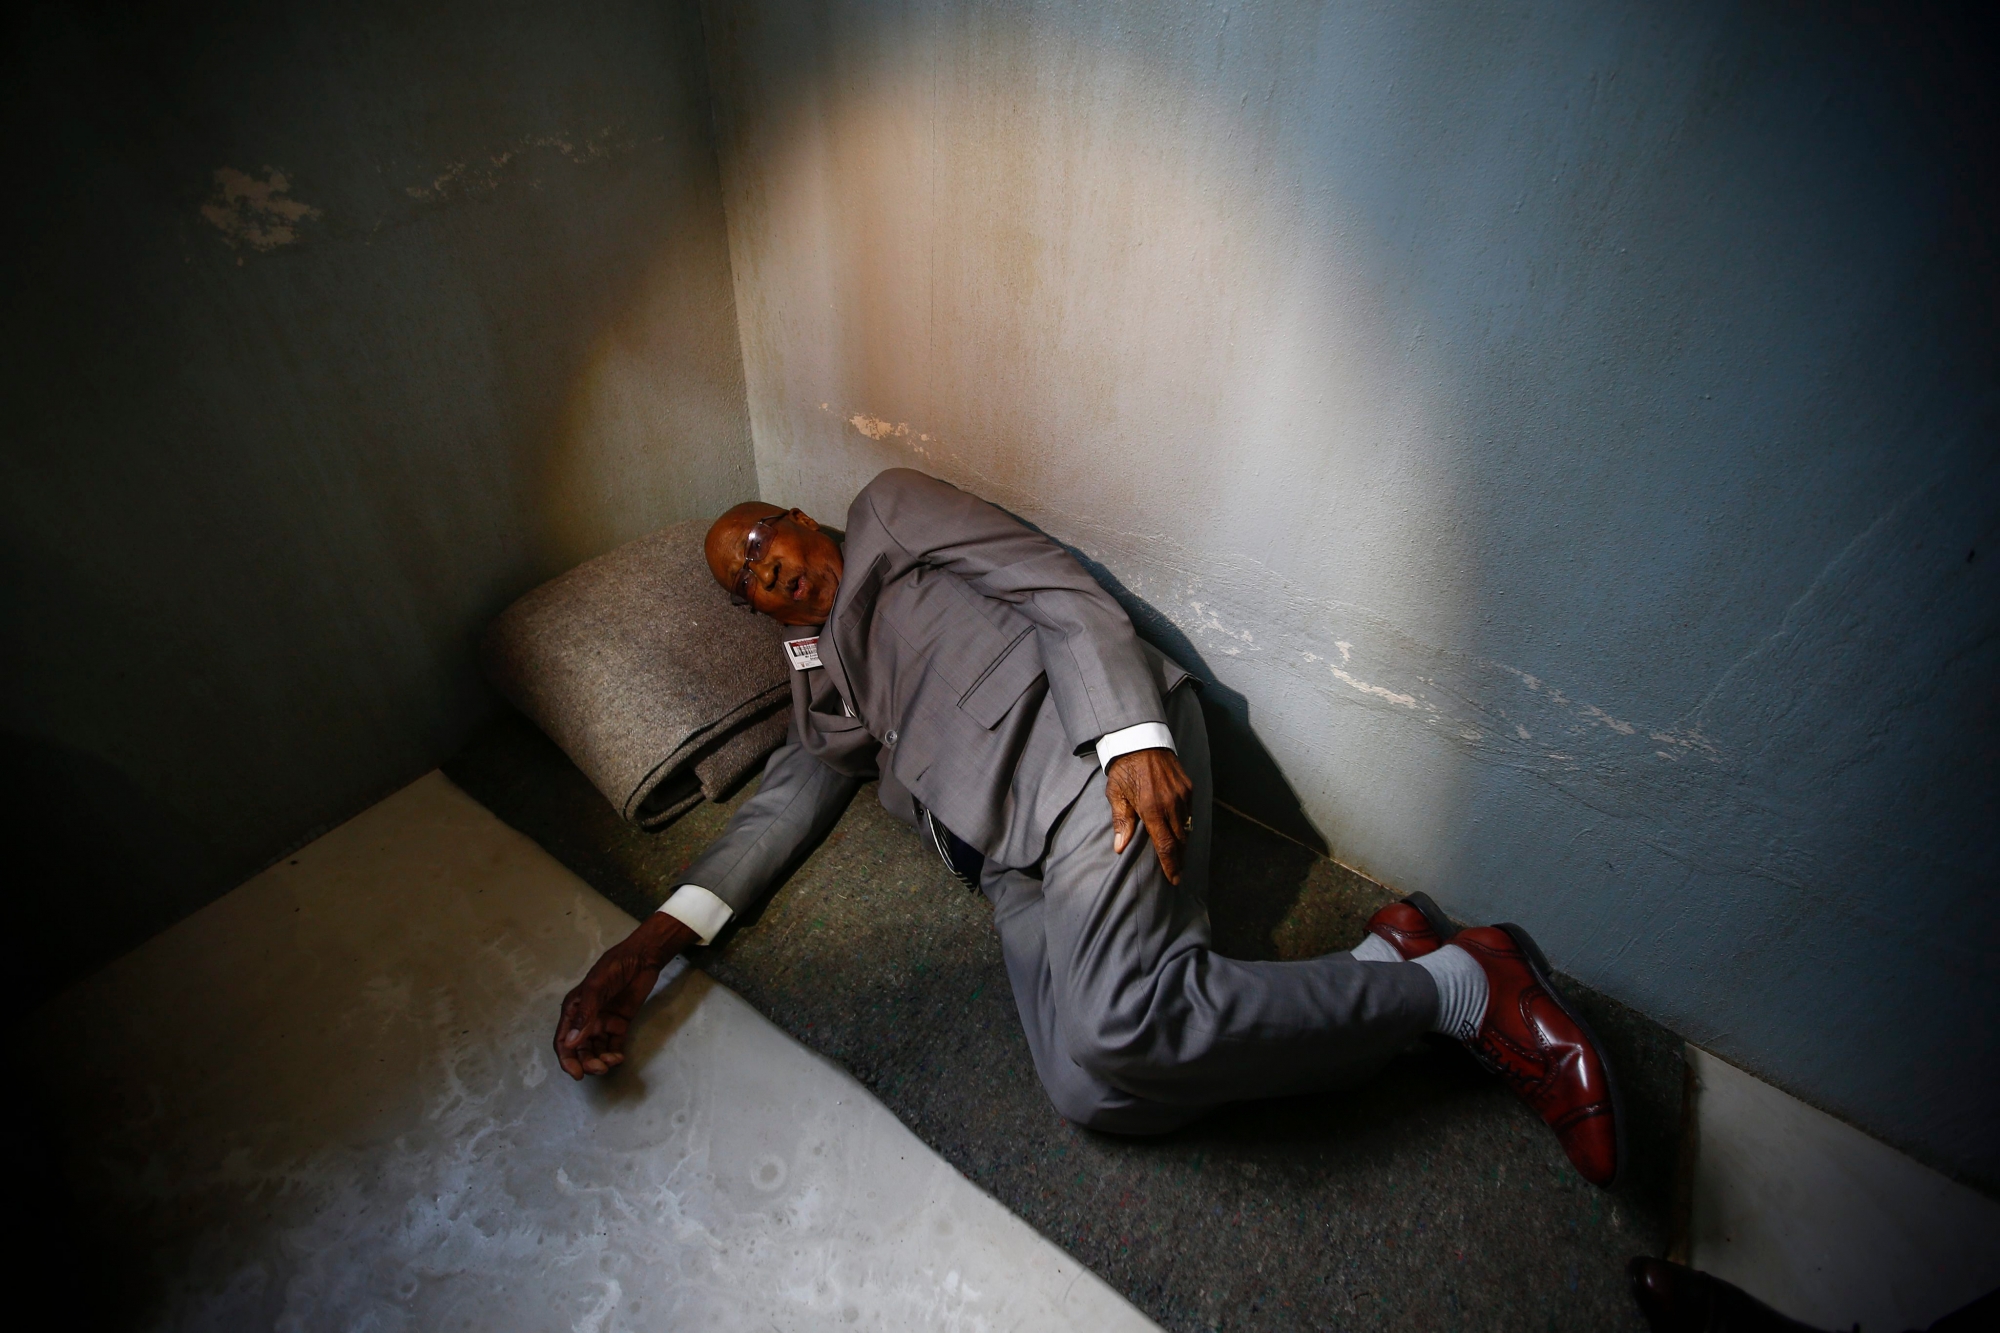 epa05556526 Andrew Mlangeni, South African political activist and former political prisoner demonstrates how he used to sleep on the floor in a prison cell during the launch of the replica of Nelson Mandela's Robben Island Prison Cell in Cape Town, South Africa, 26 September 2016. Former South African president and Nobel Peace laureate Nelson Mandela was imprisoned in a cell of these exact proportions for 27 years. This mobile replica will make its way around the country to enable young people who have never been to the Robben Island Museum to get a personal perspective of the history that unfolded on Robben Island and South Africa. EPA/NIC BOTHMA SOUTH AFRICA HISTORY MANDELA PRISON CELL REPLICA